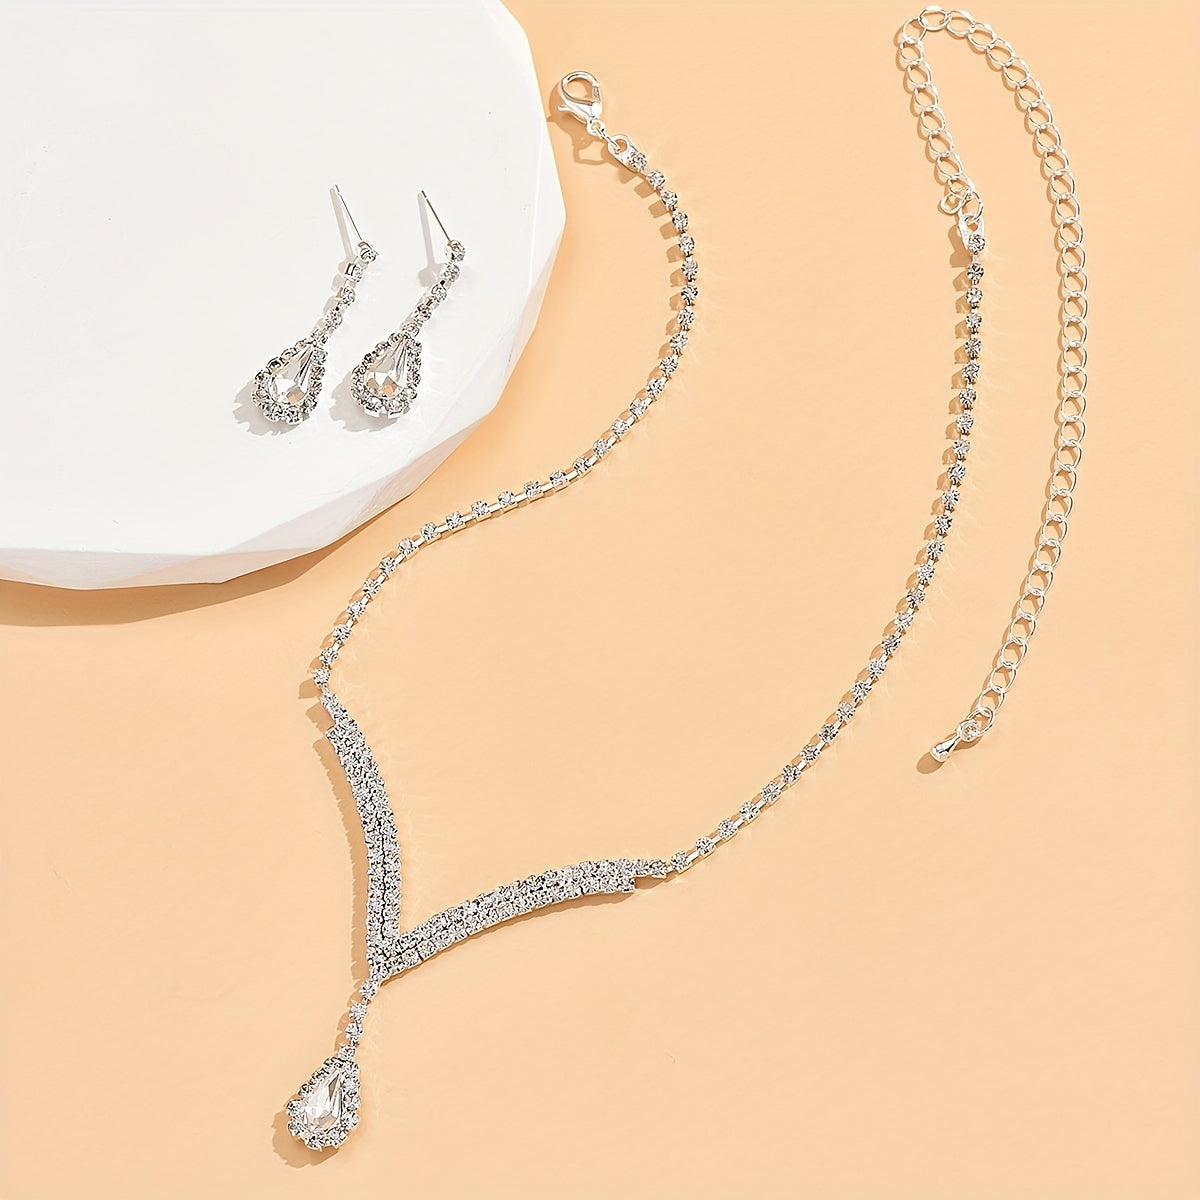 Elegant Water Drop Rhinestone Necklace and Earrings Set - Fine Jewelry for a Sophisticated Look